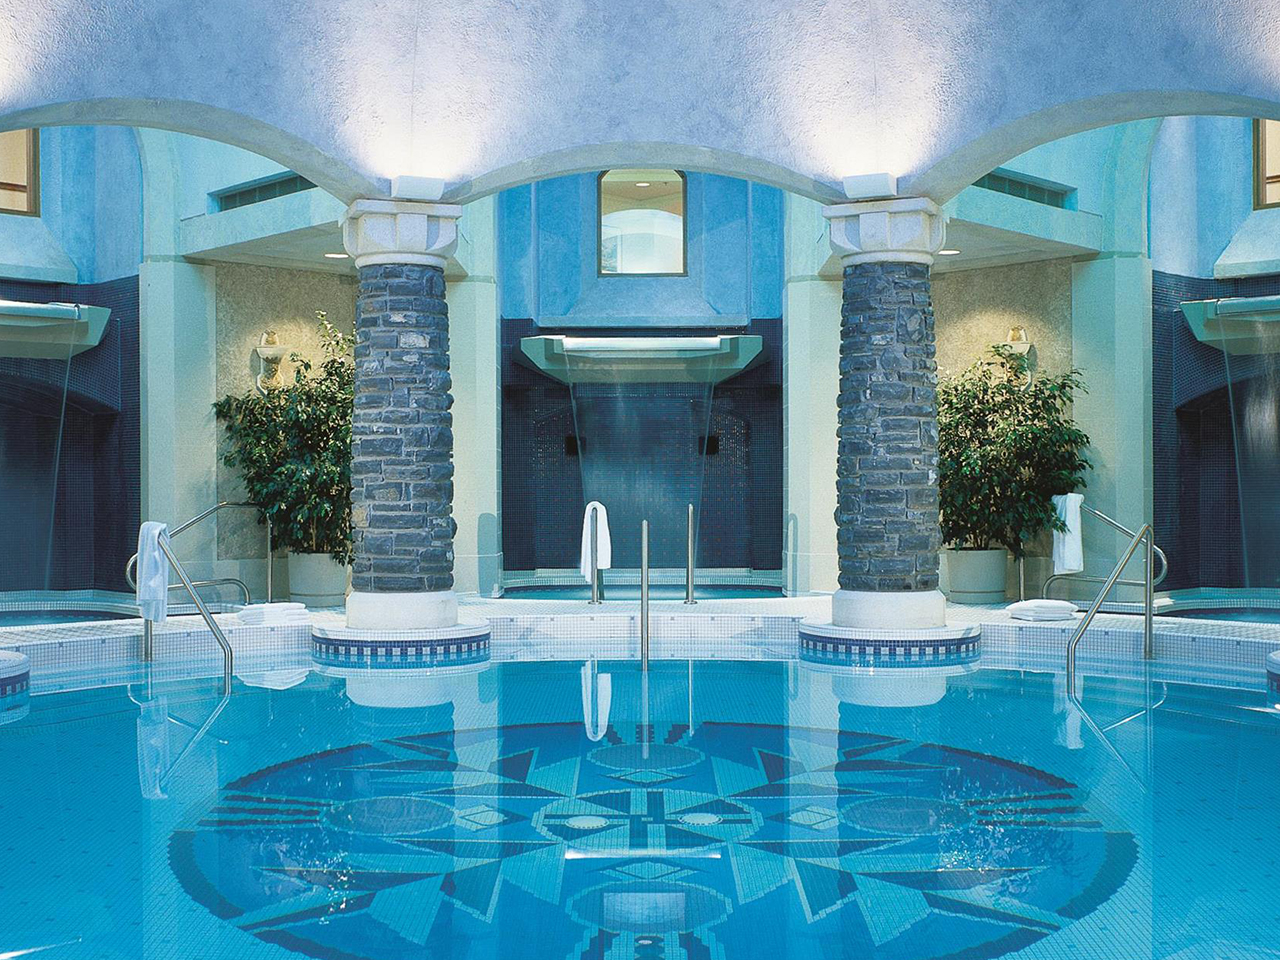 Photo of the pool facilities at Willow Stream Spa